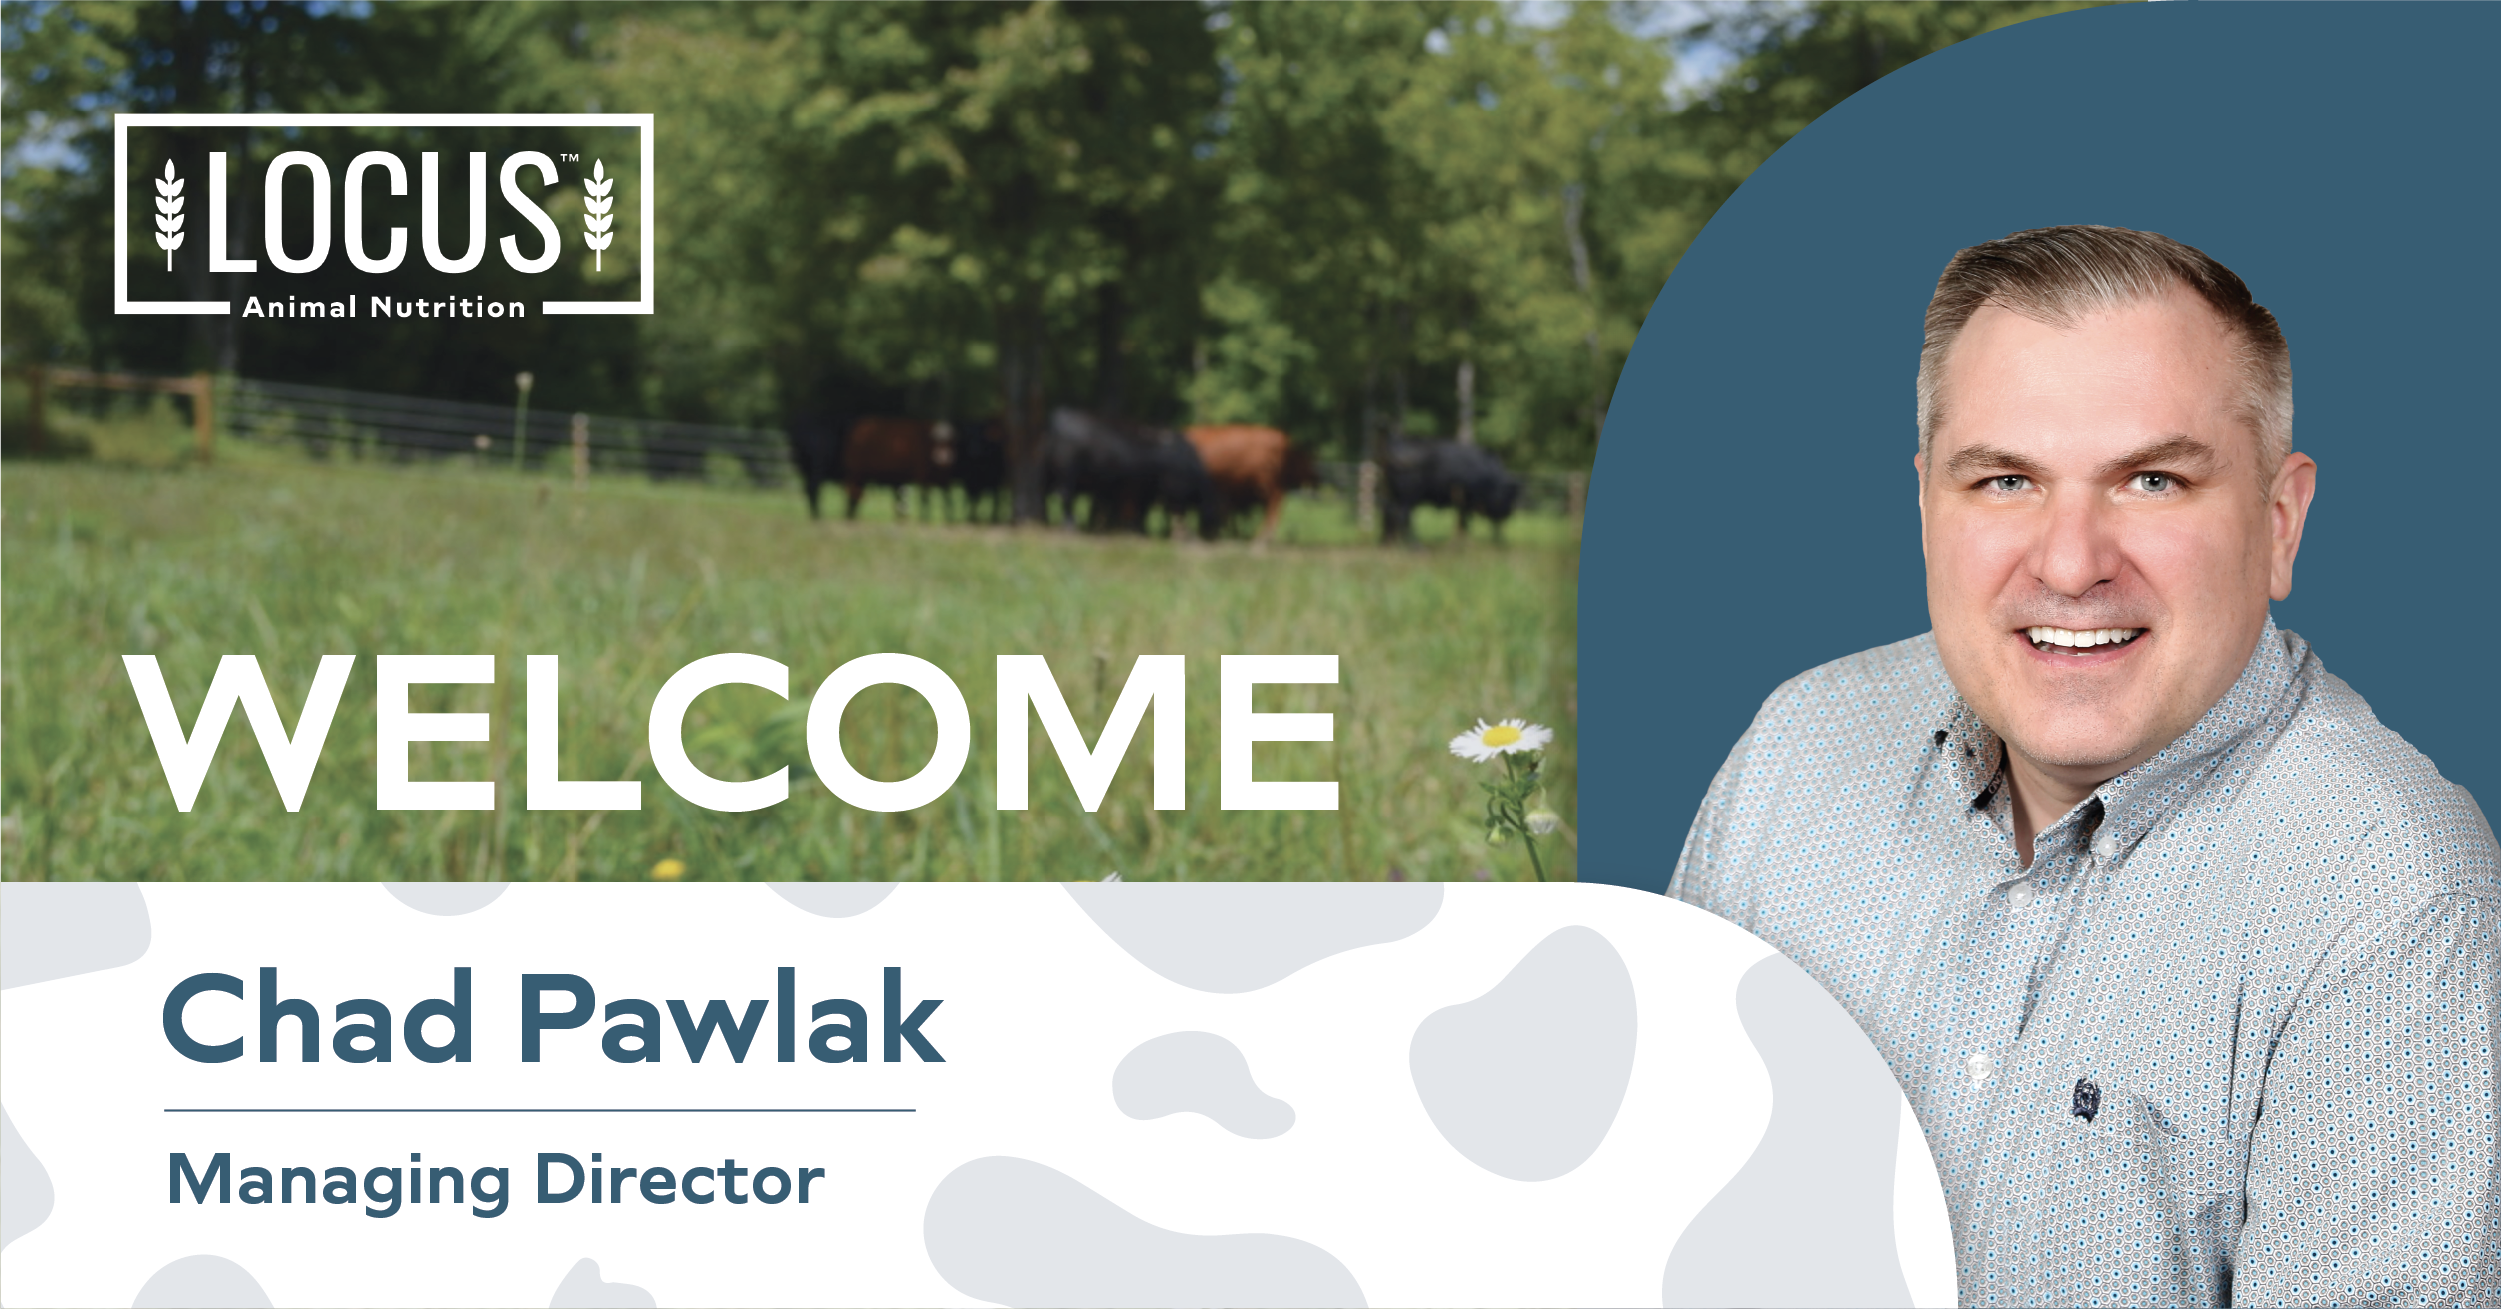 Meet the Livestock Expert Joining Locus Animal Nutrition to Commercialize Bovine Methane-Reduction Technology